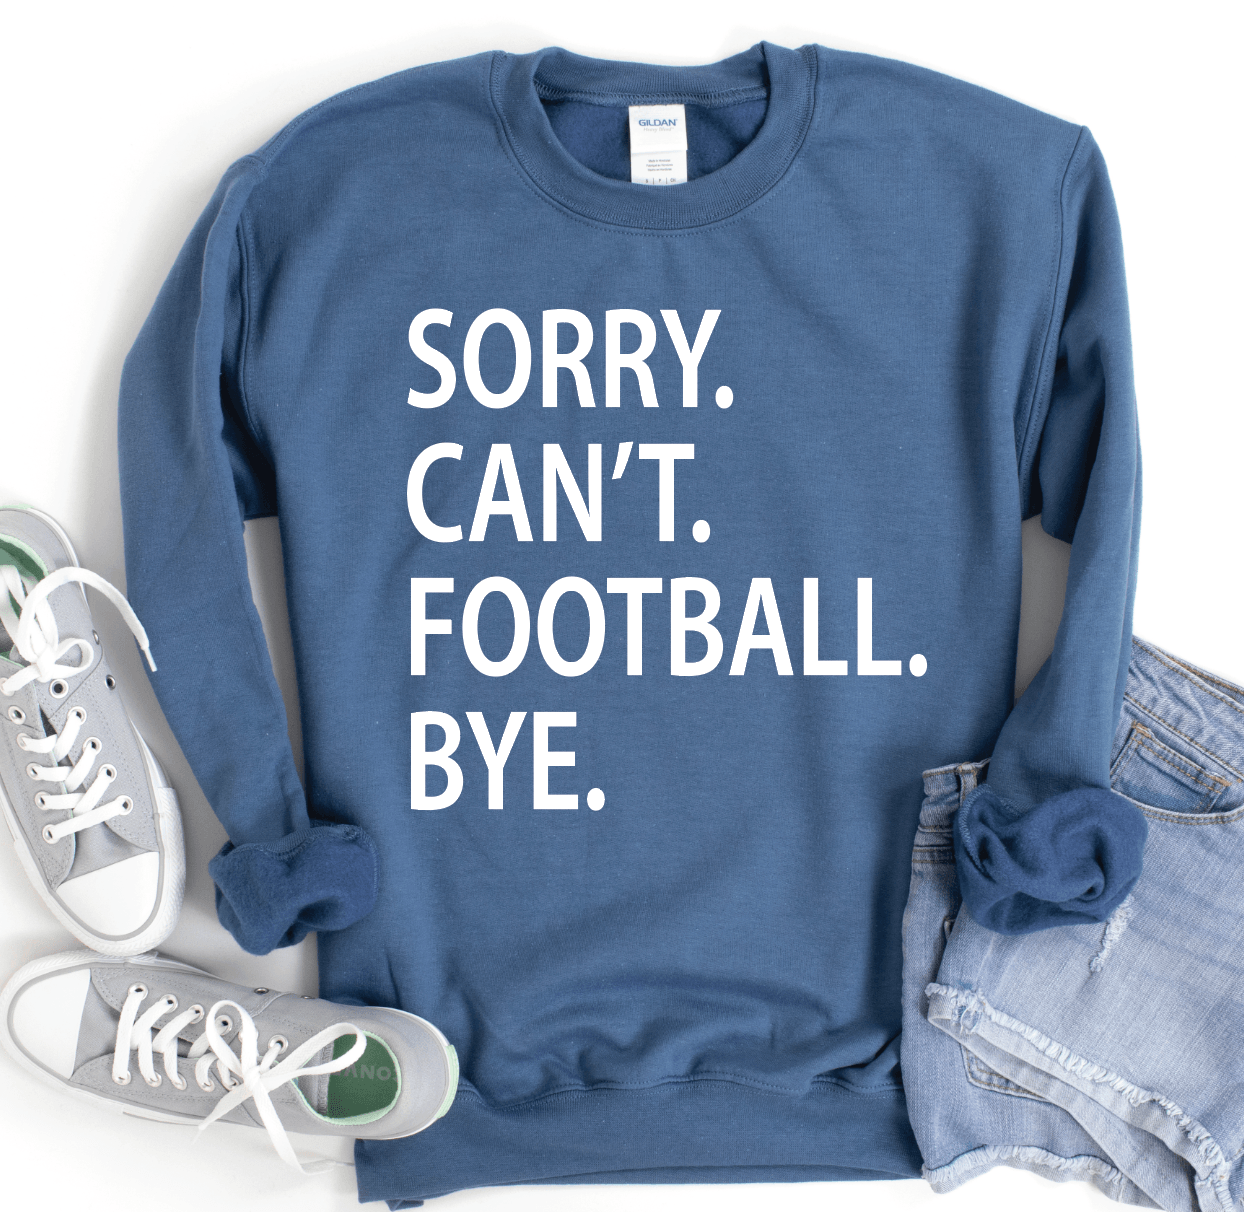 Sorry. Can't. Football. Bye. - Signastyle Boutique